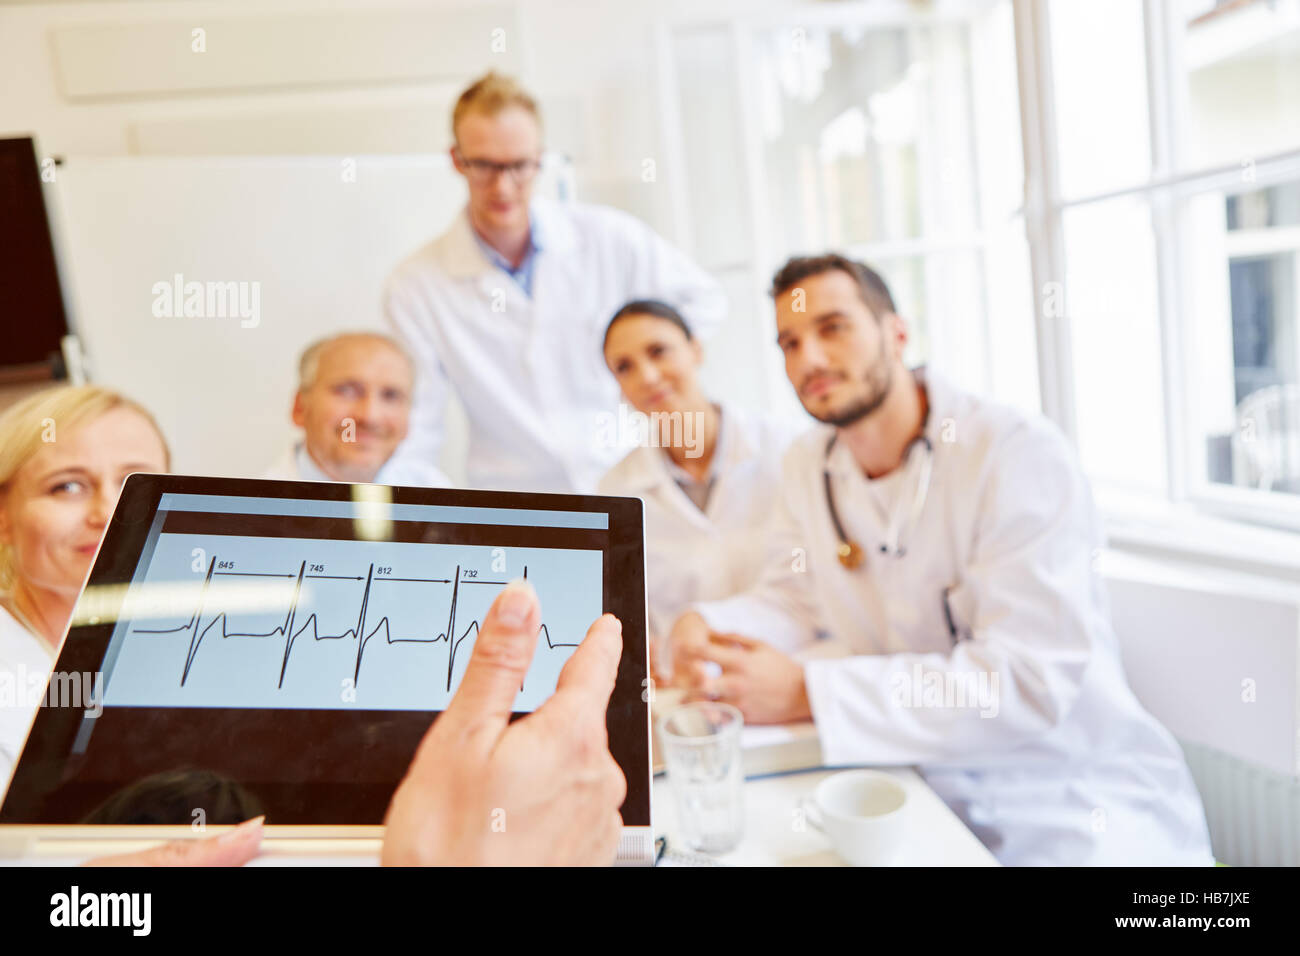 Doctors discussing ECG finding in meeting and thinking about diagnostic for patient Stock Photo